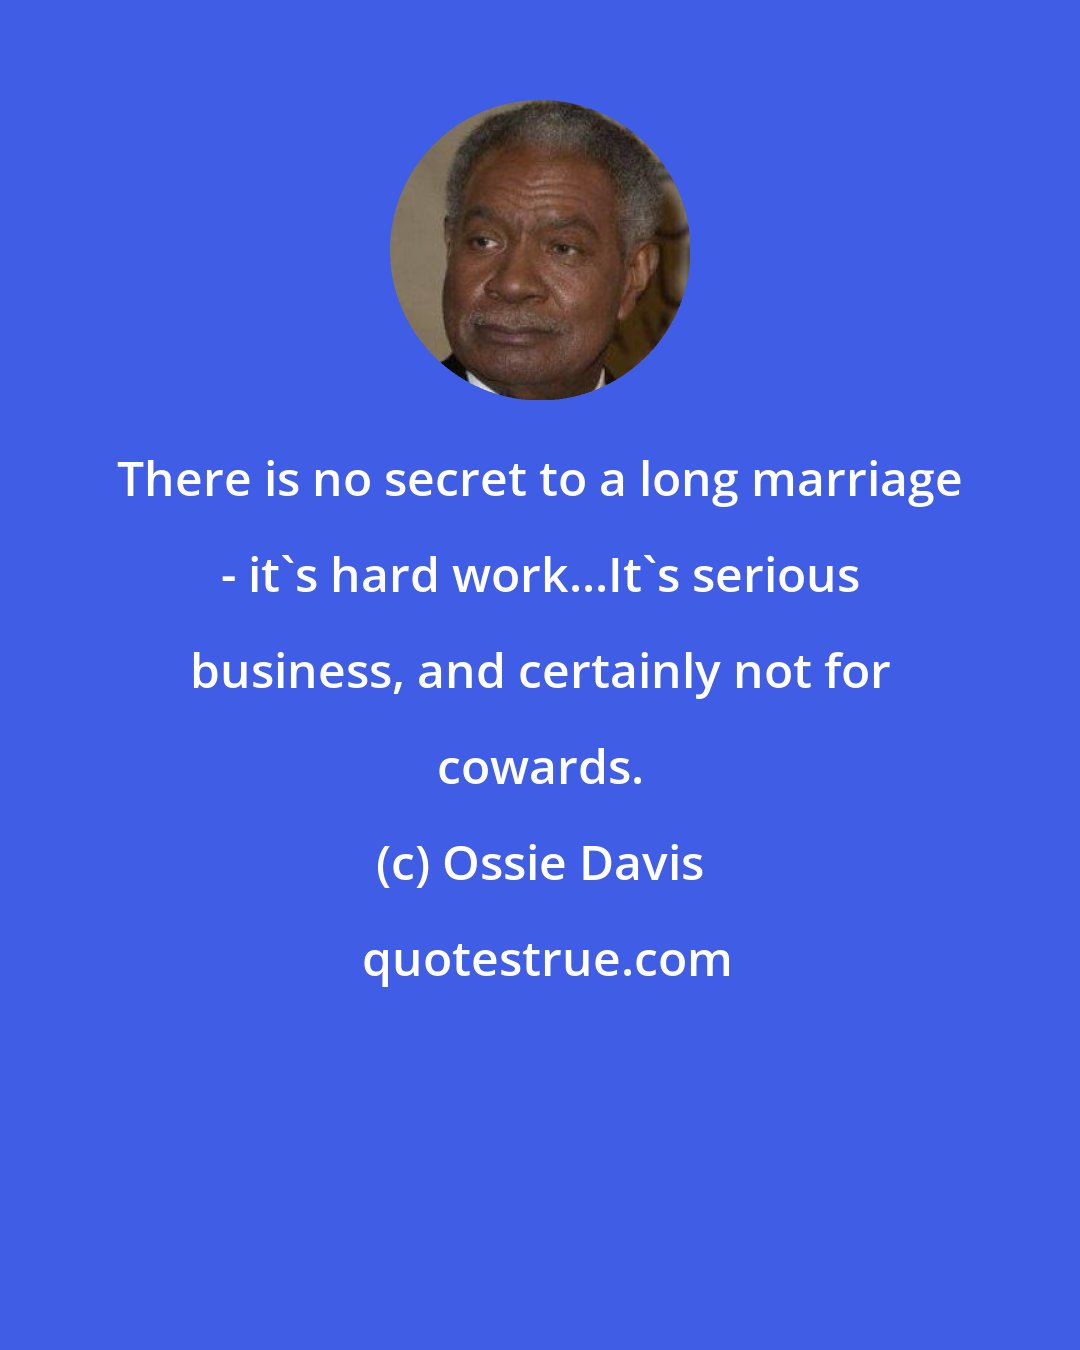 Ossie Davis: There is no secret to a long marriage - it's hard work...It's serious business, and certainly not for cowards.